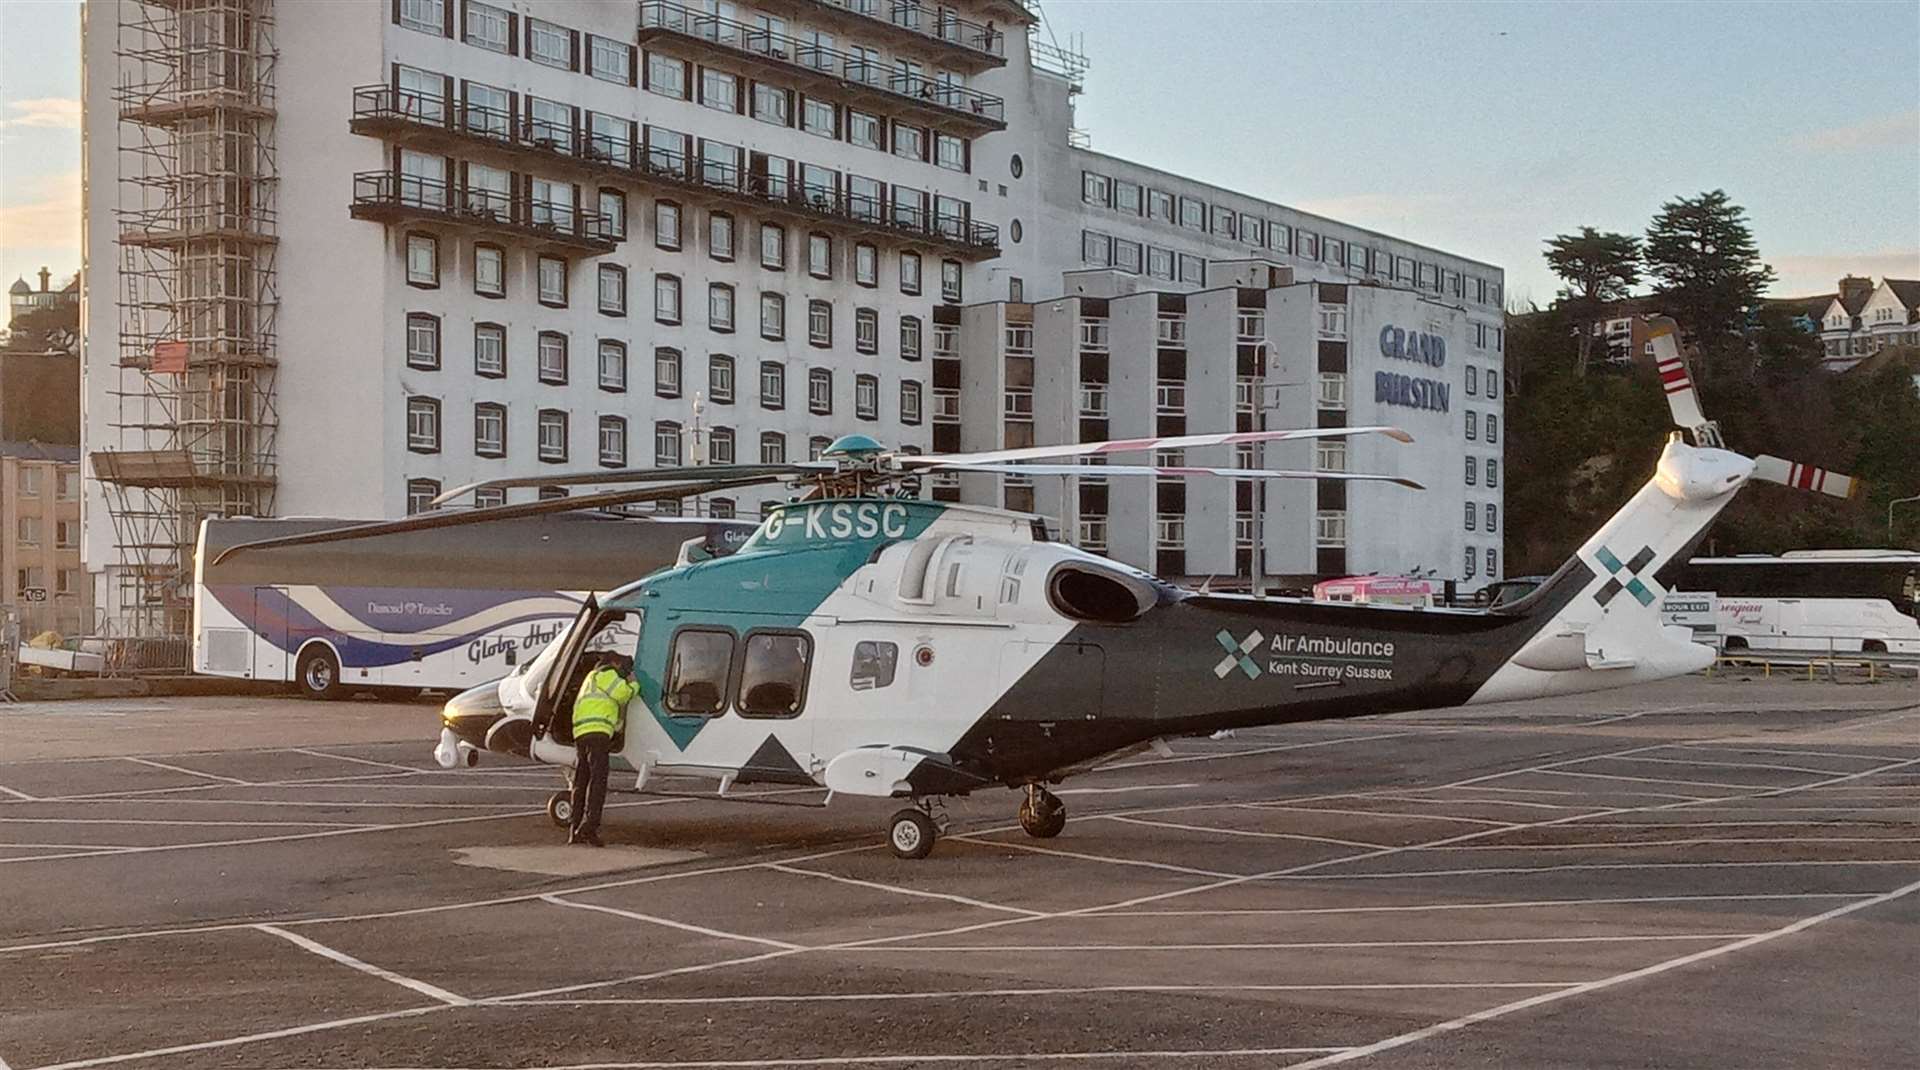 The Kent Air Ambulance benefited from the scheme